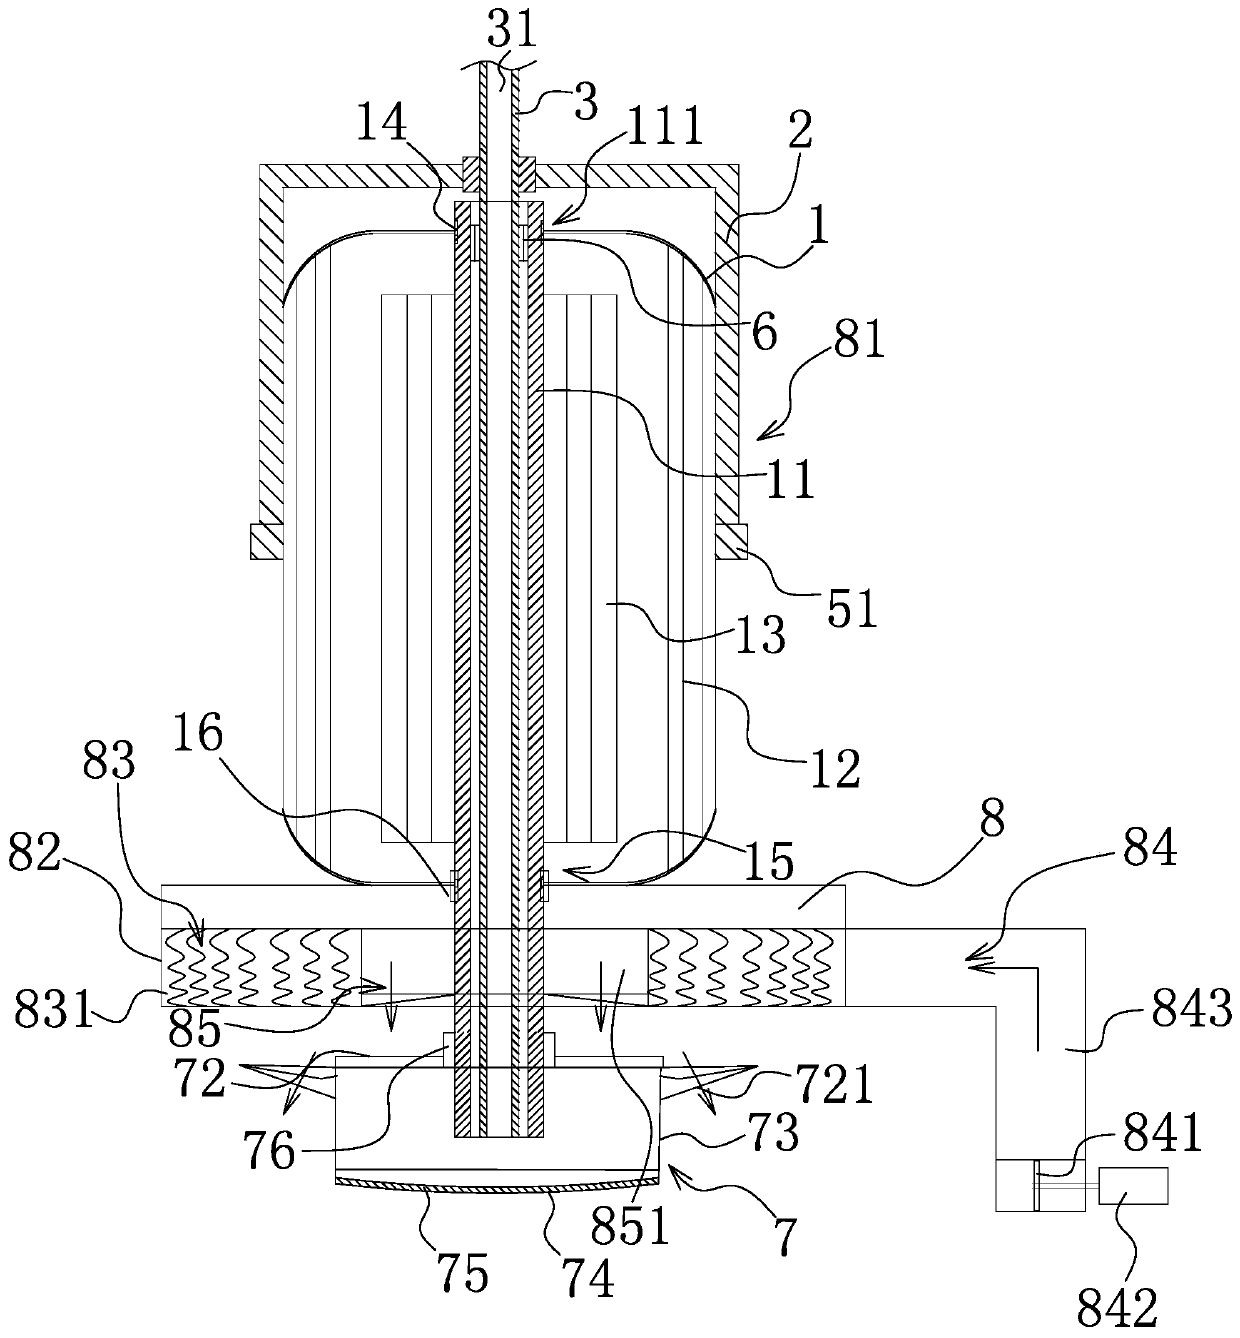 Thread throwing device of colloidal silk forming equipment